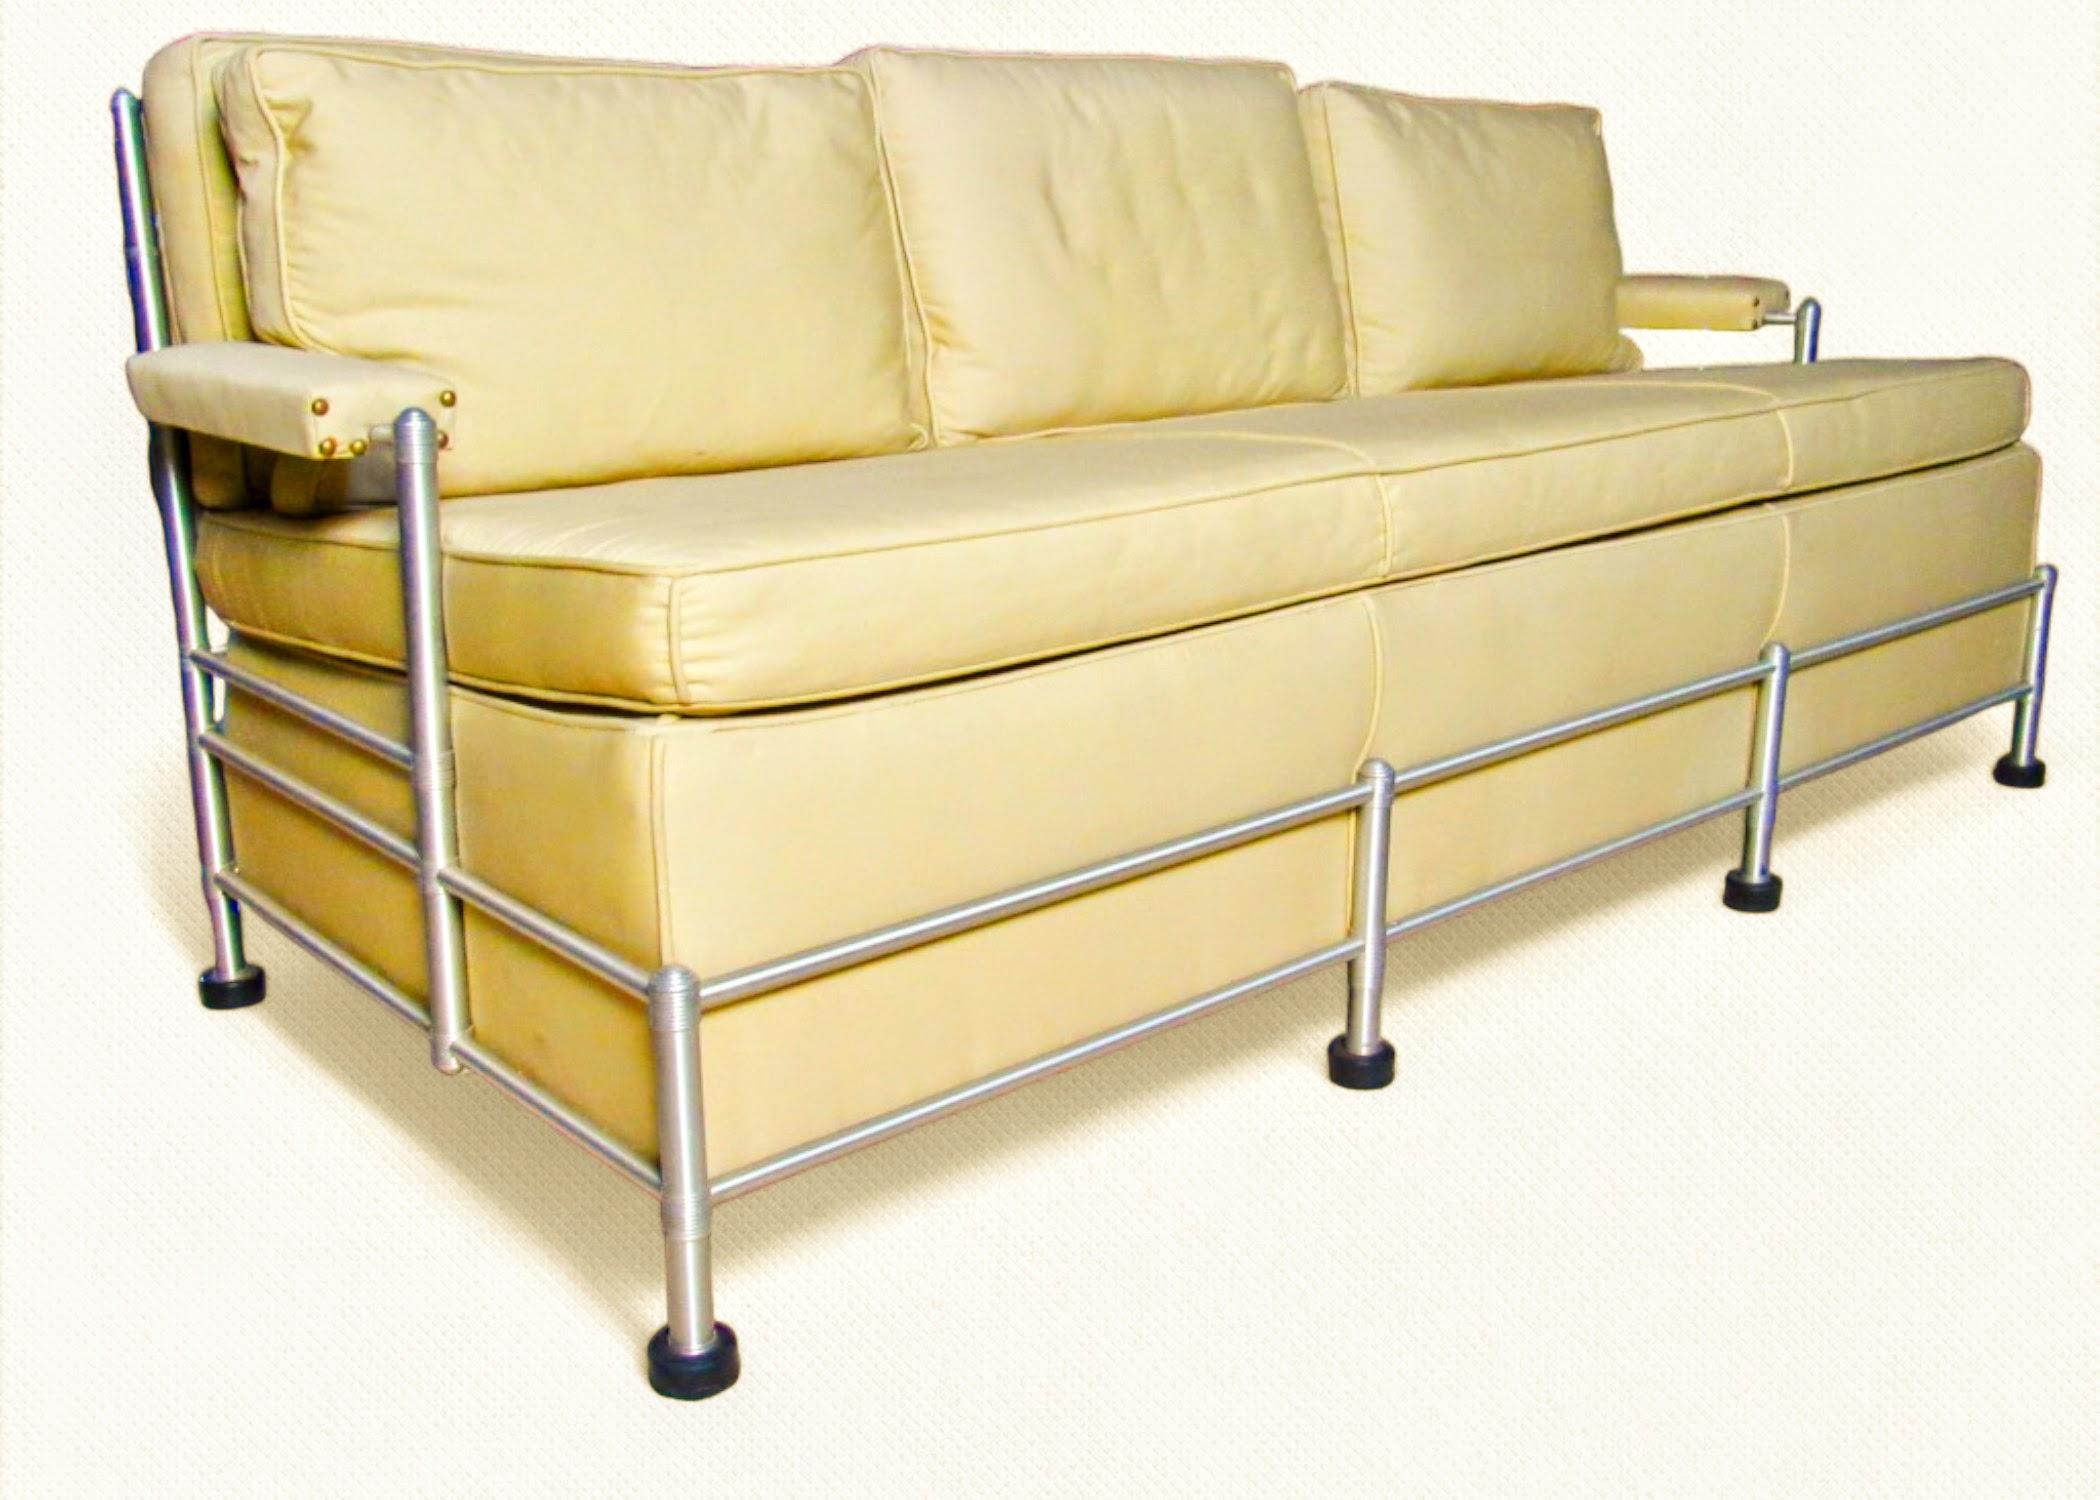 A slat back three-seat sofa, an early design by Warren McArthur manufactured in Rome, New York in 1933-1934. 
The slat back seating of Warren McArthur is his first seating design introduced in his earliest line of furniture production in Los Angeles